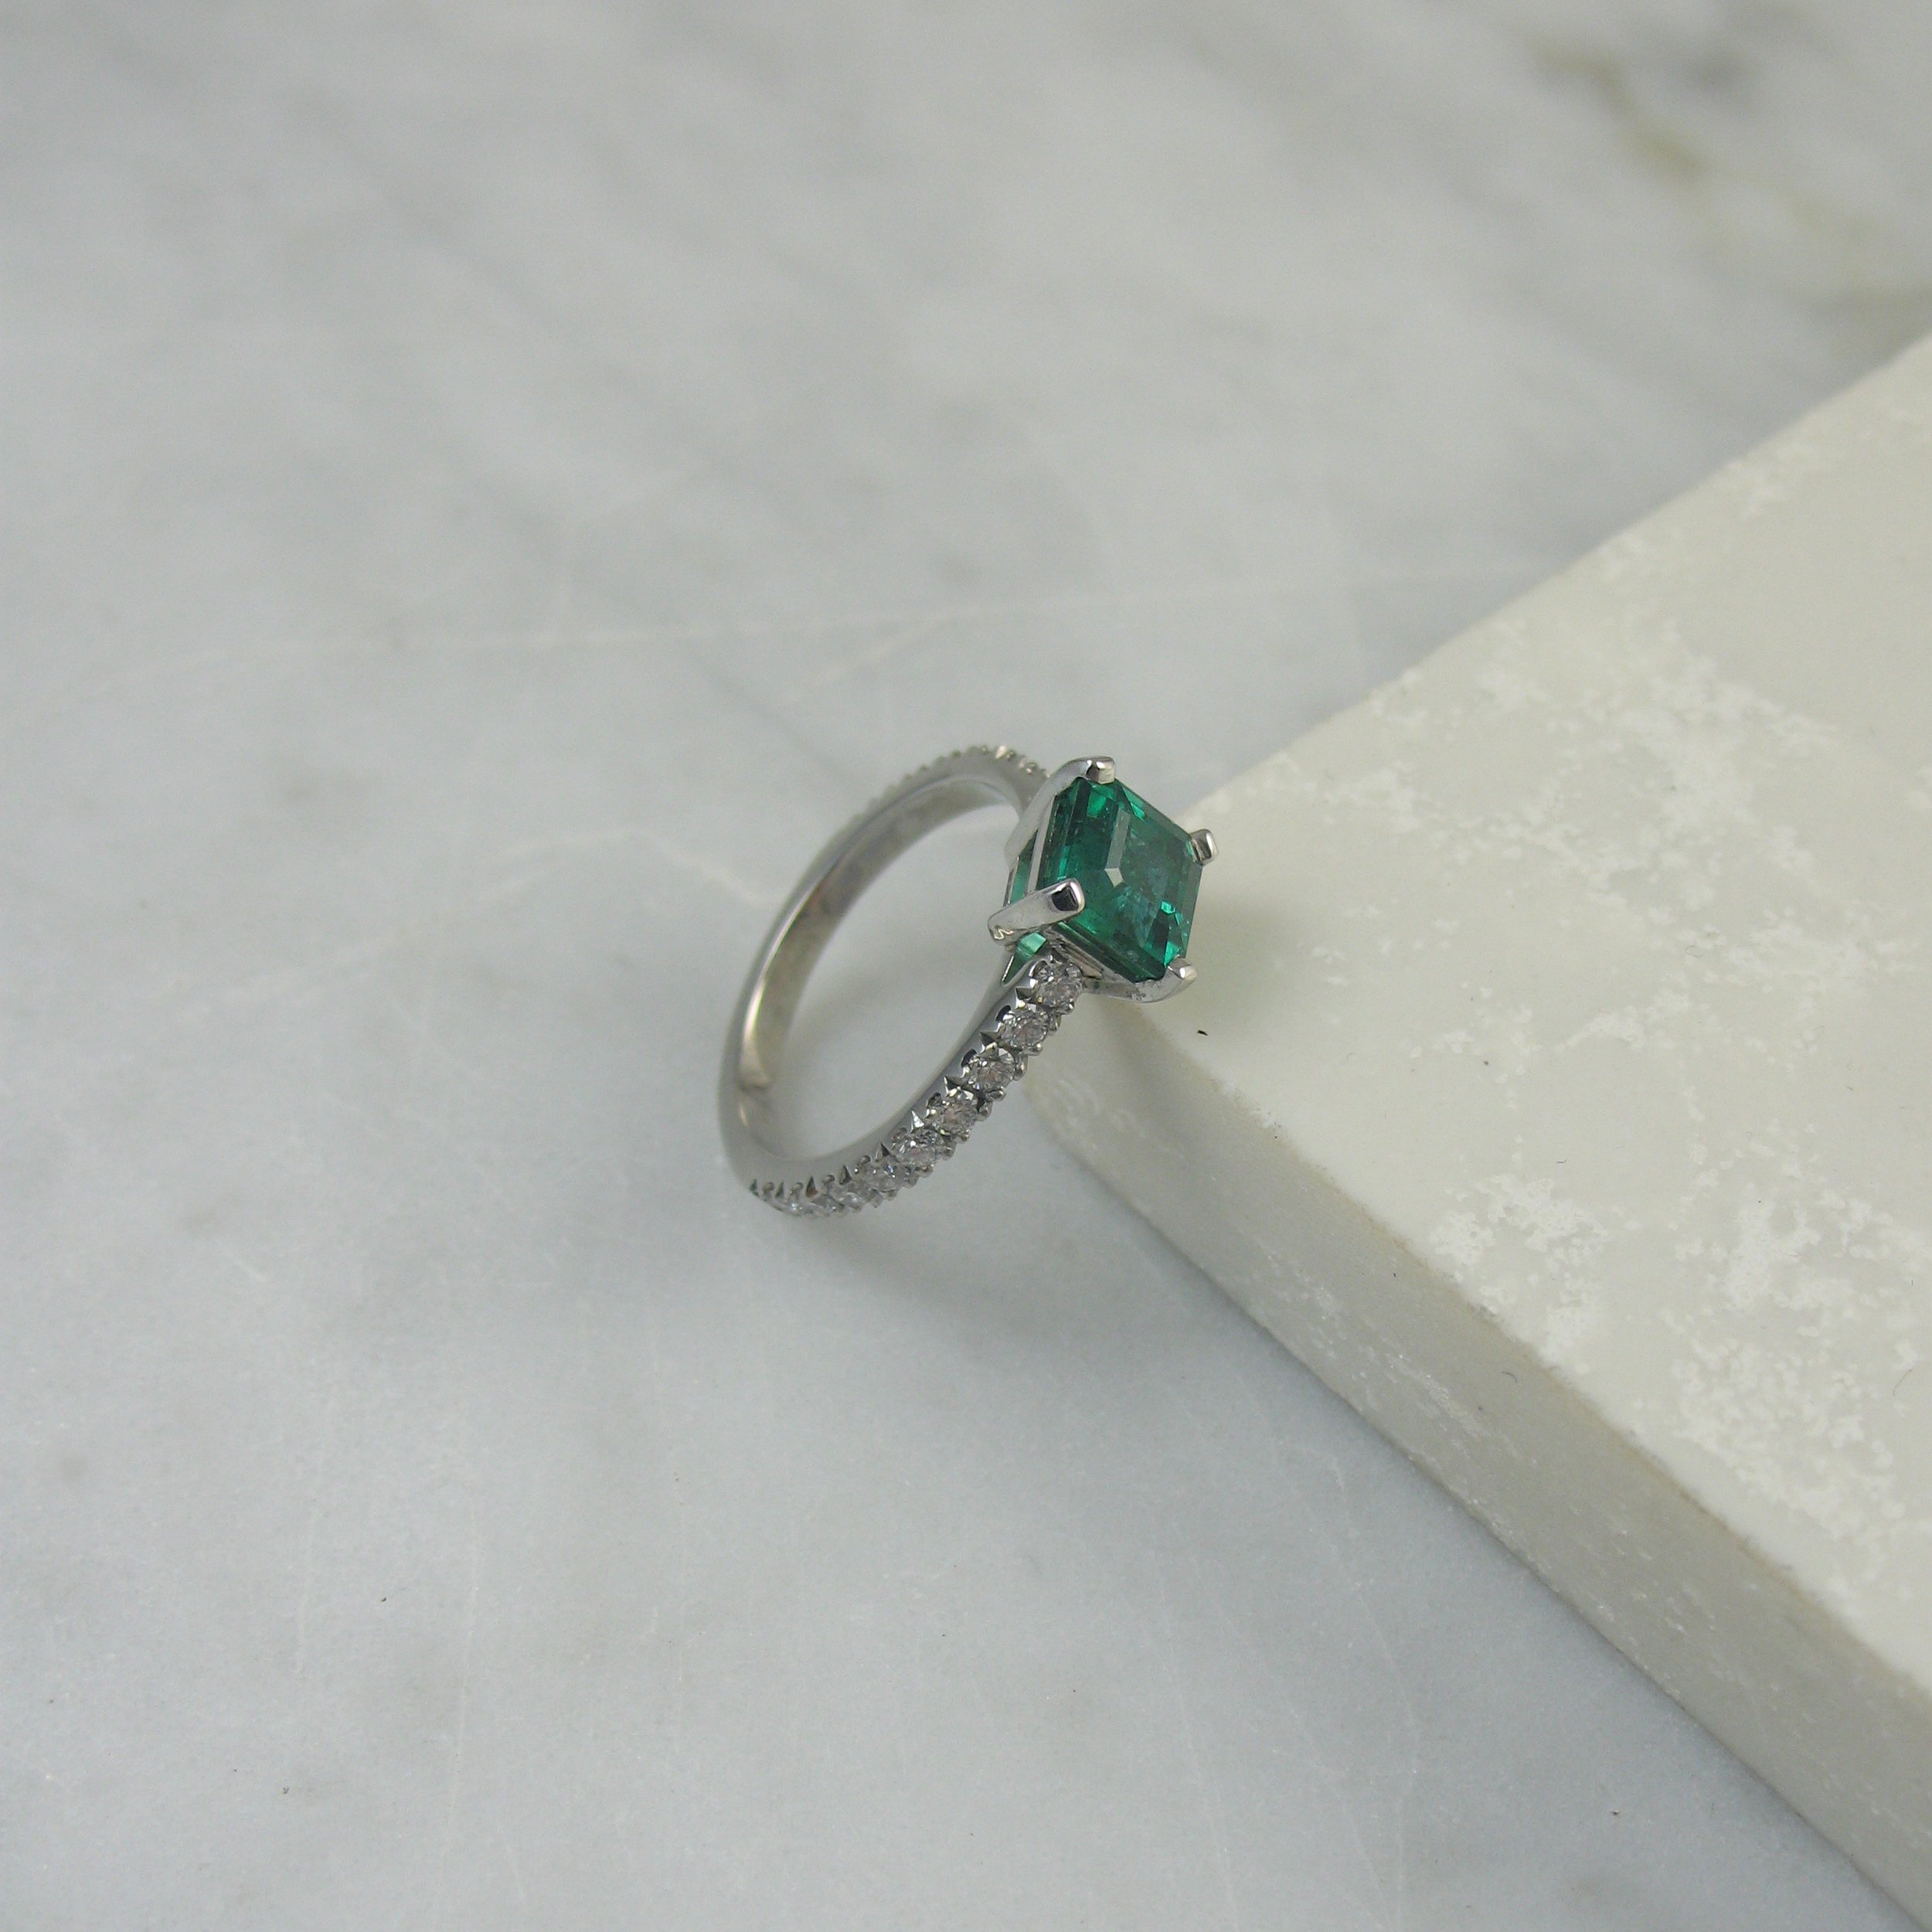 An emerald engagement ring with diamonds around the entire band